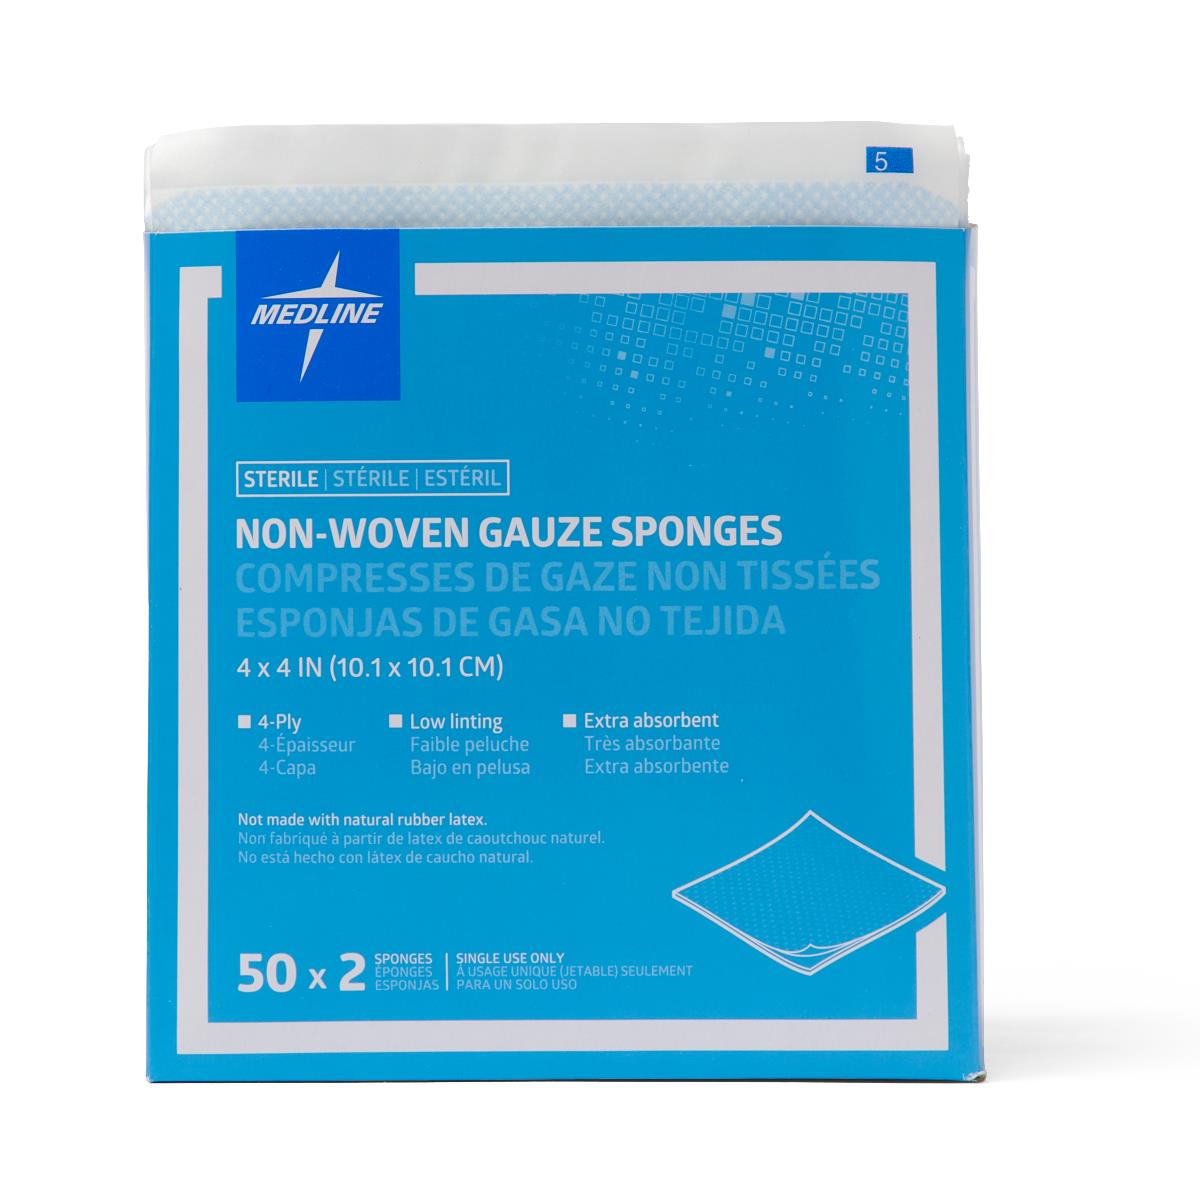 Choice® Nonwoven 600 4 x 4 (Pack)